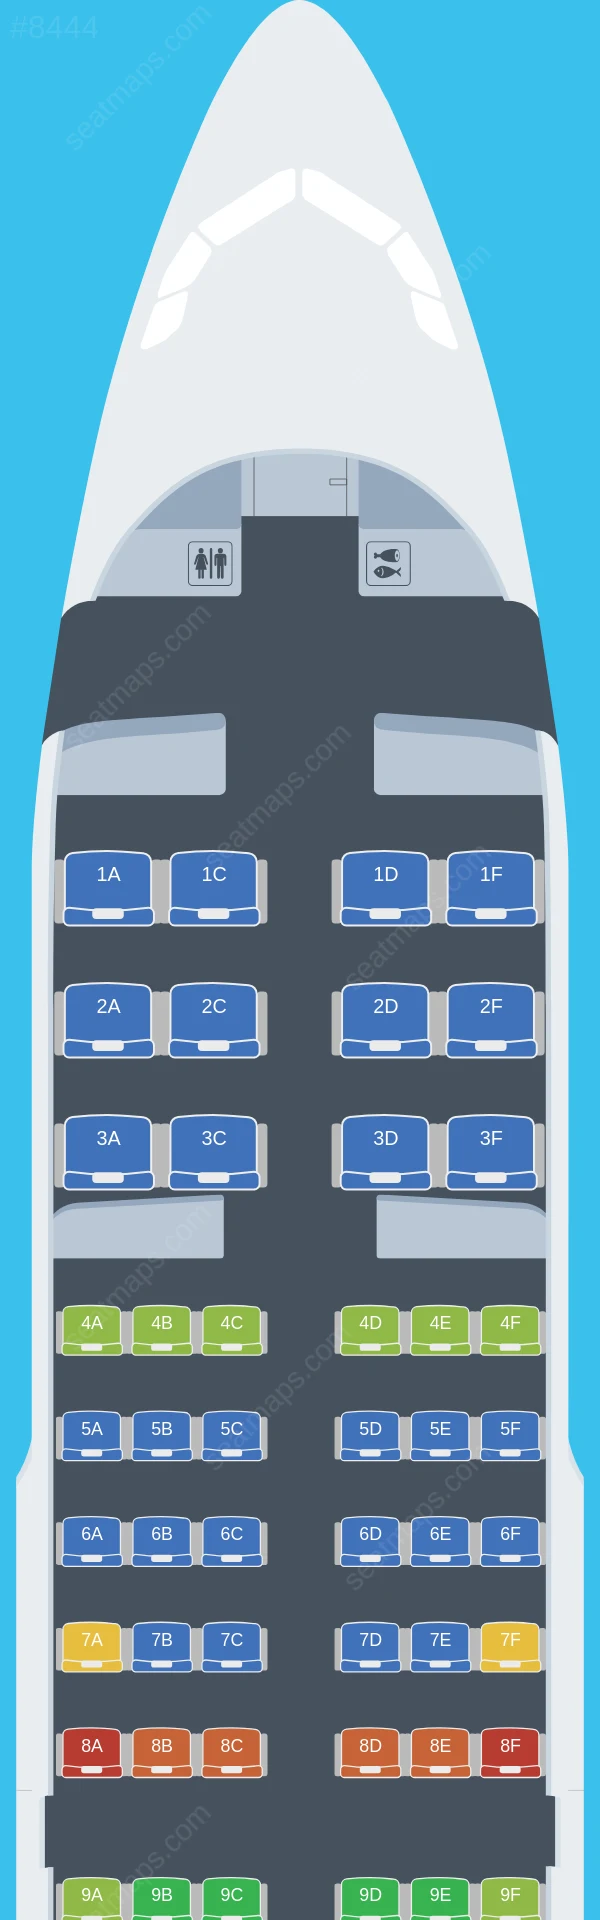 Bhutan Airlines Airbus A319-100 seatmap preview